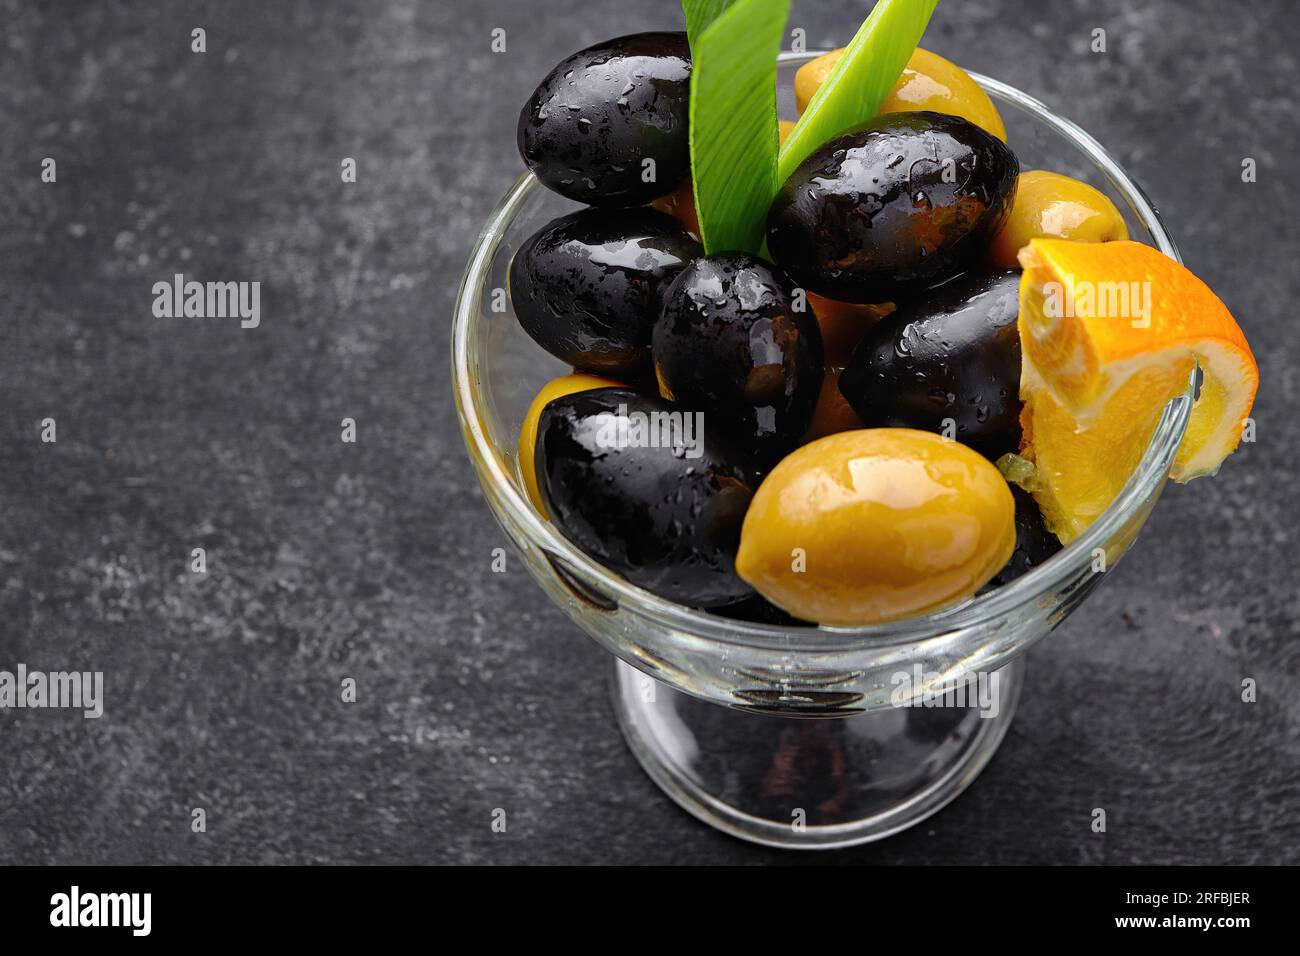 Large olives, green and black in a glass dish, on dark concrete. Close up Stock Photo